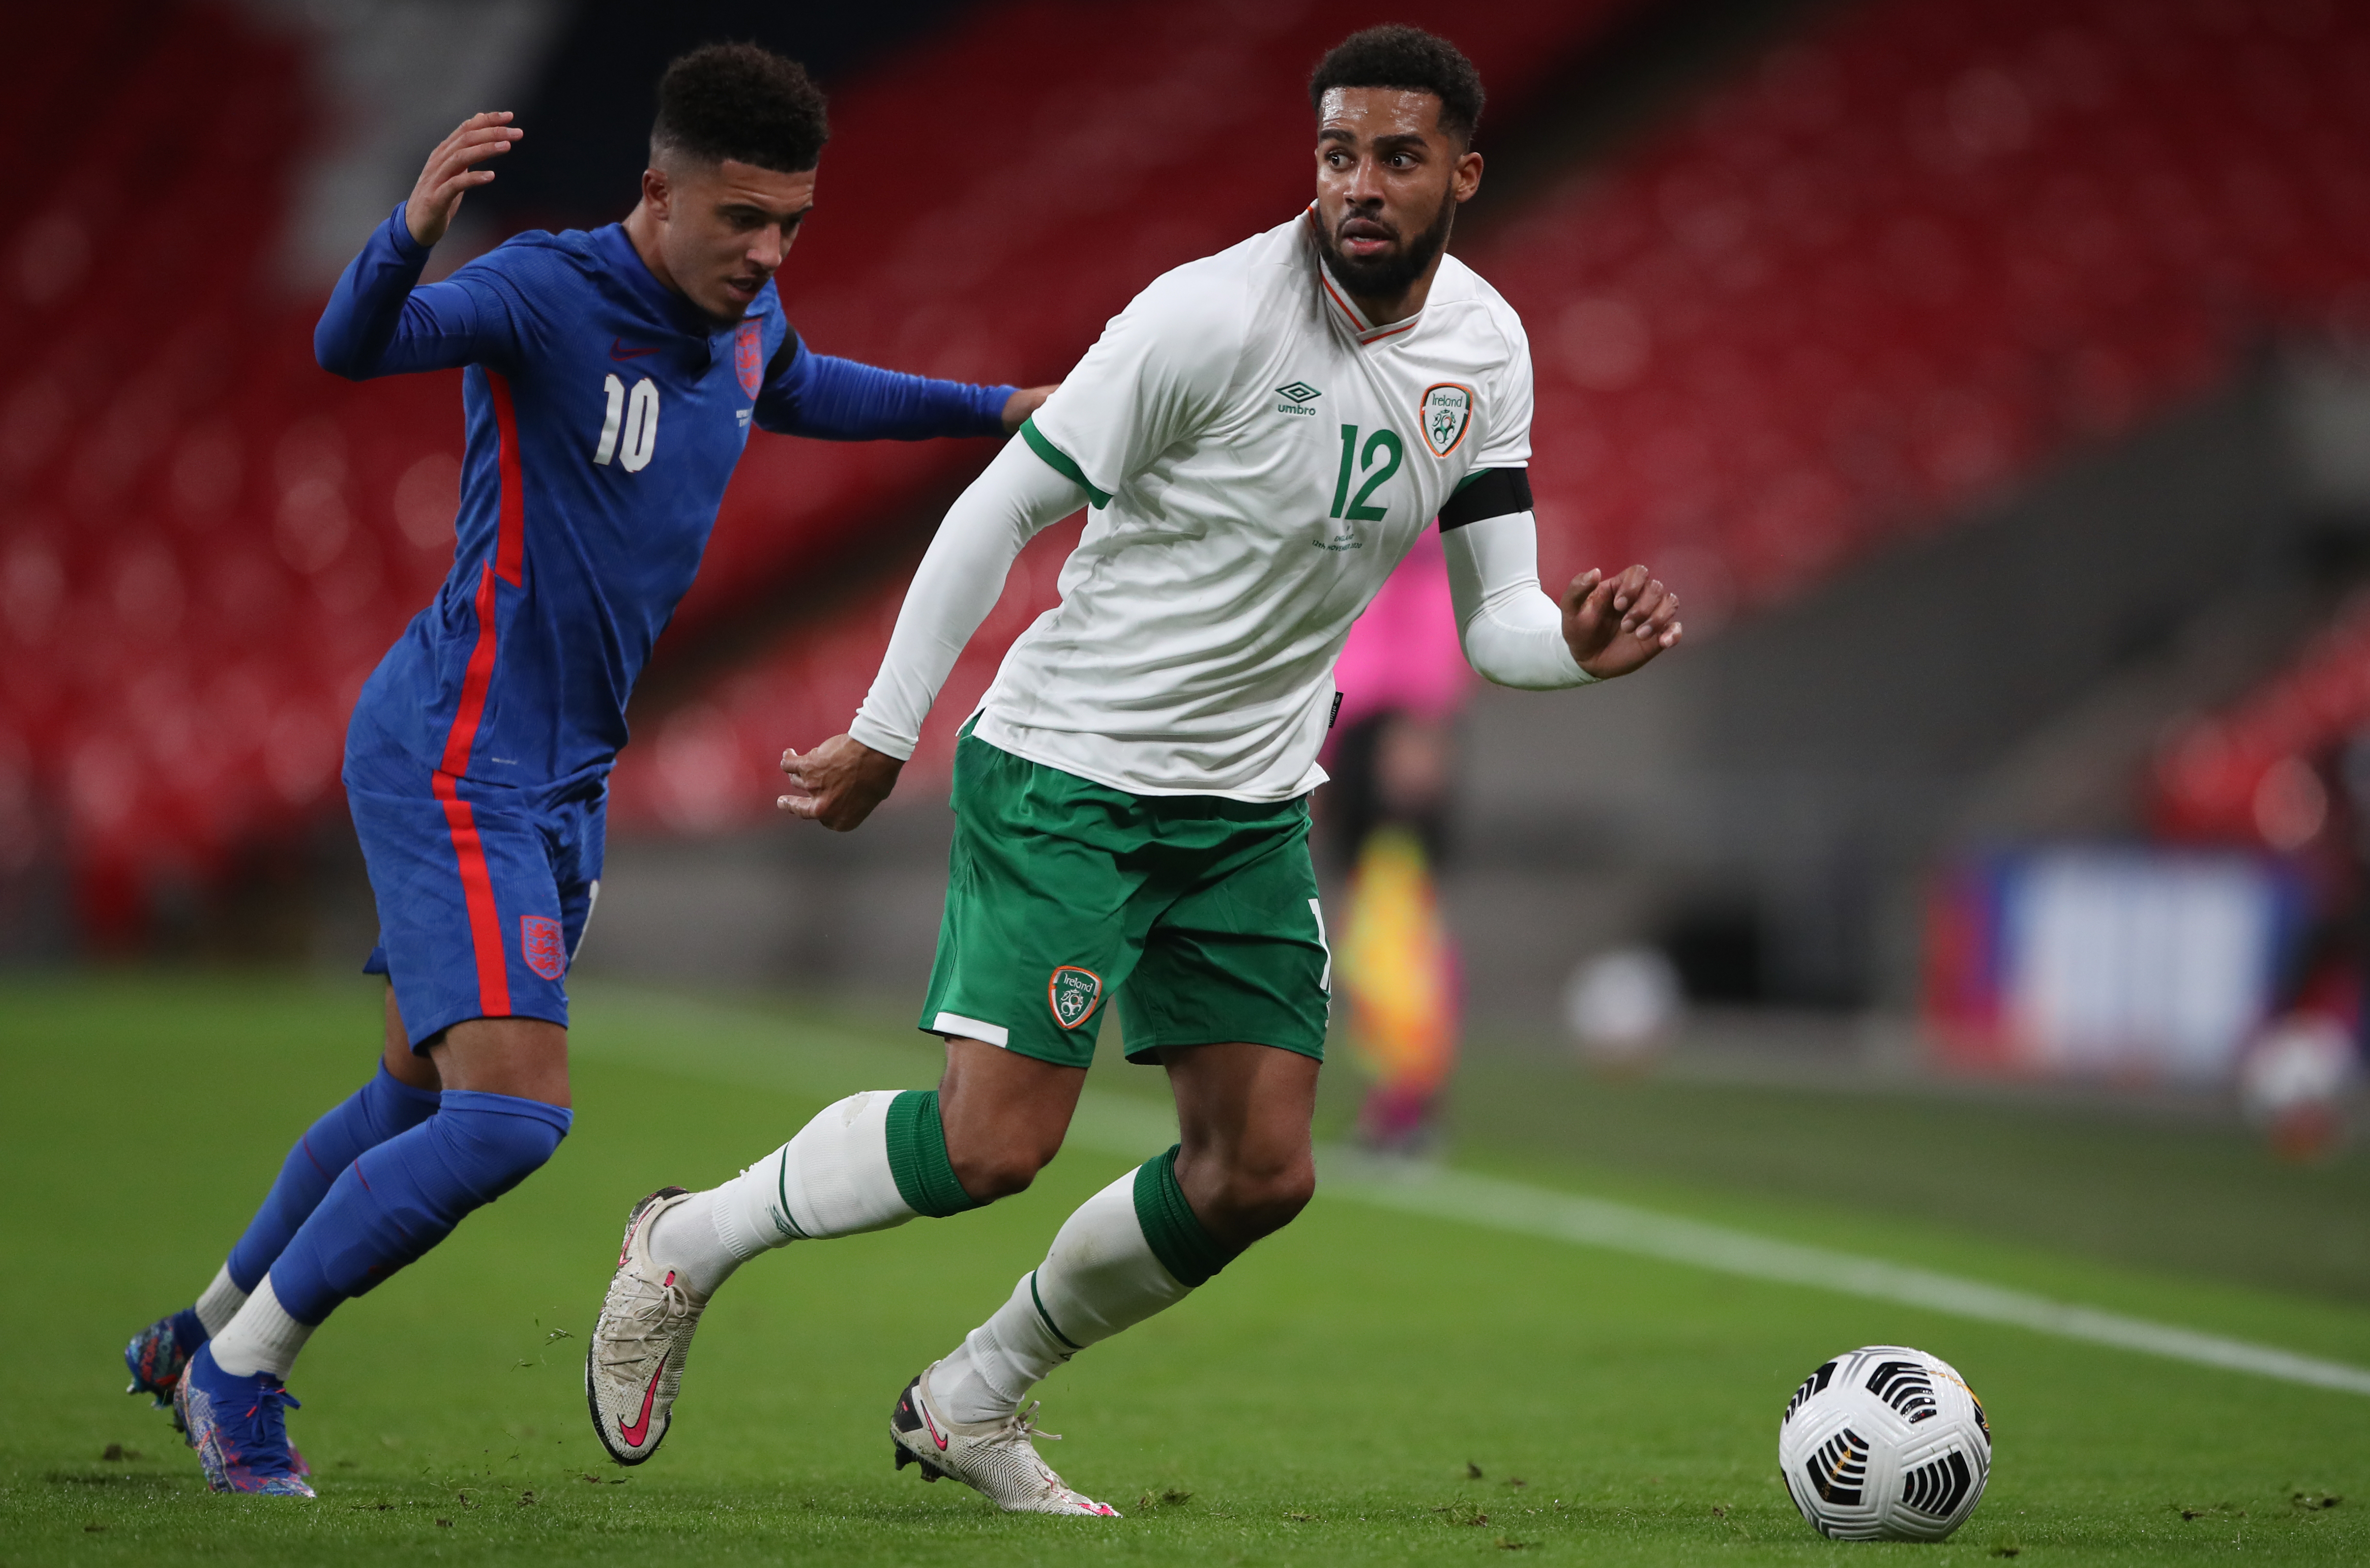 England and the Republic of Ireland last met in a friendly in November 2020